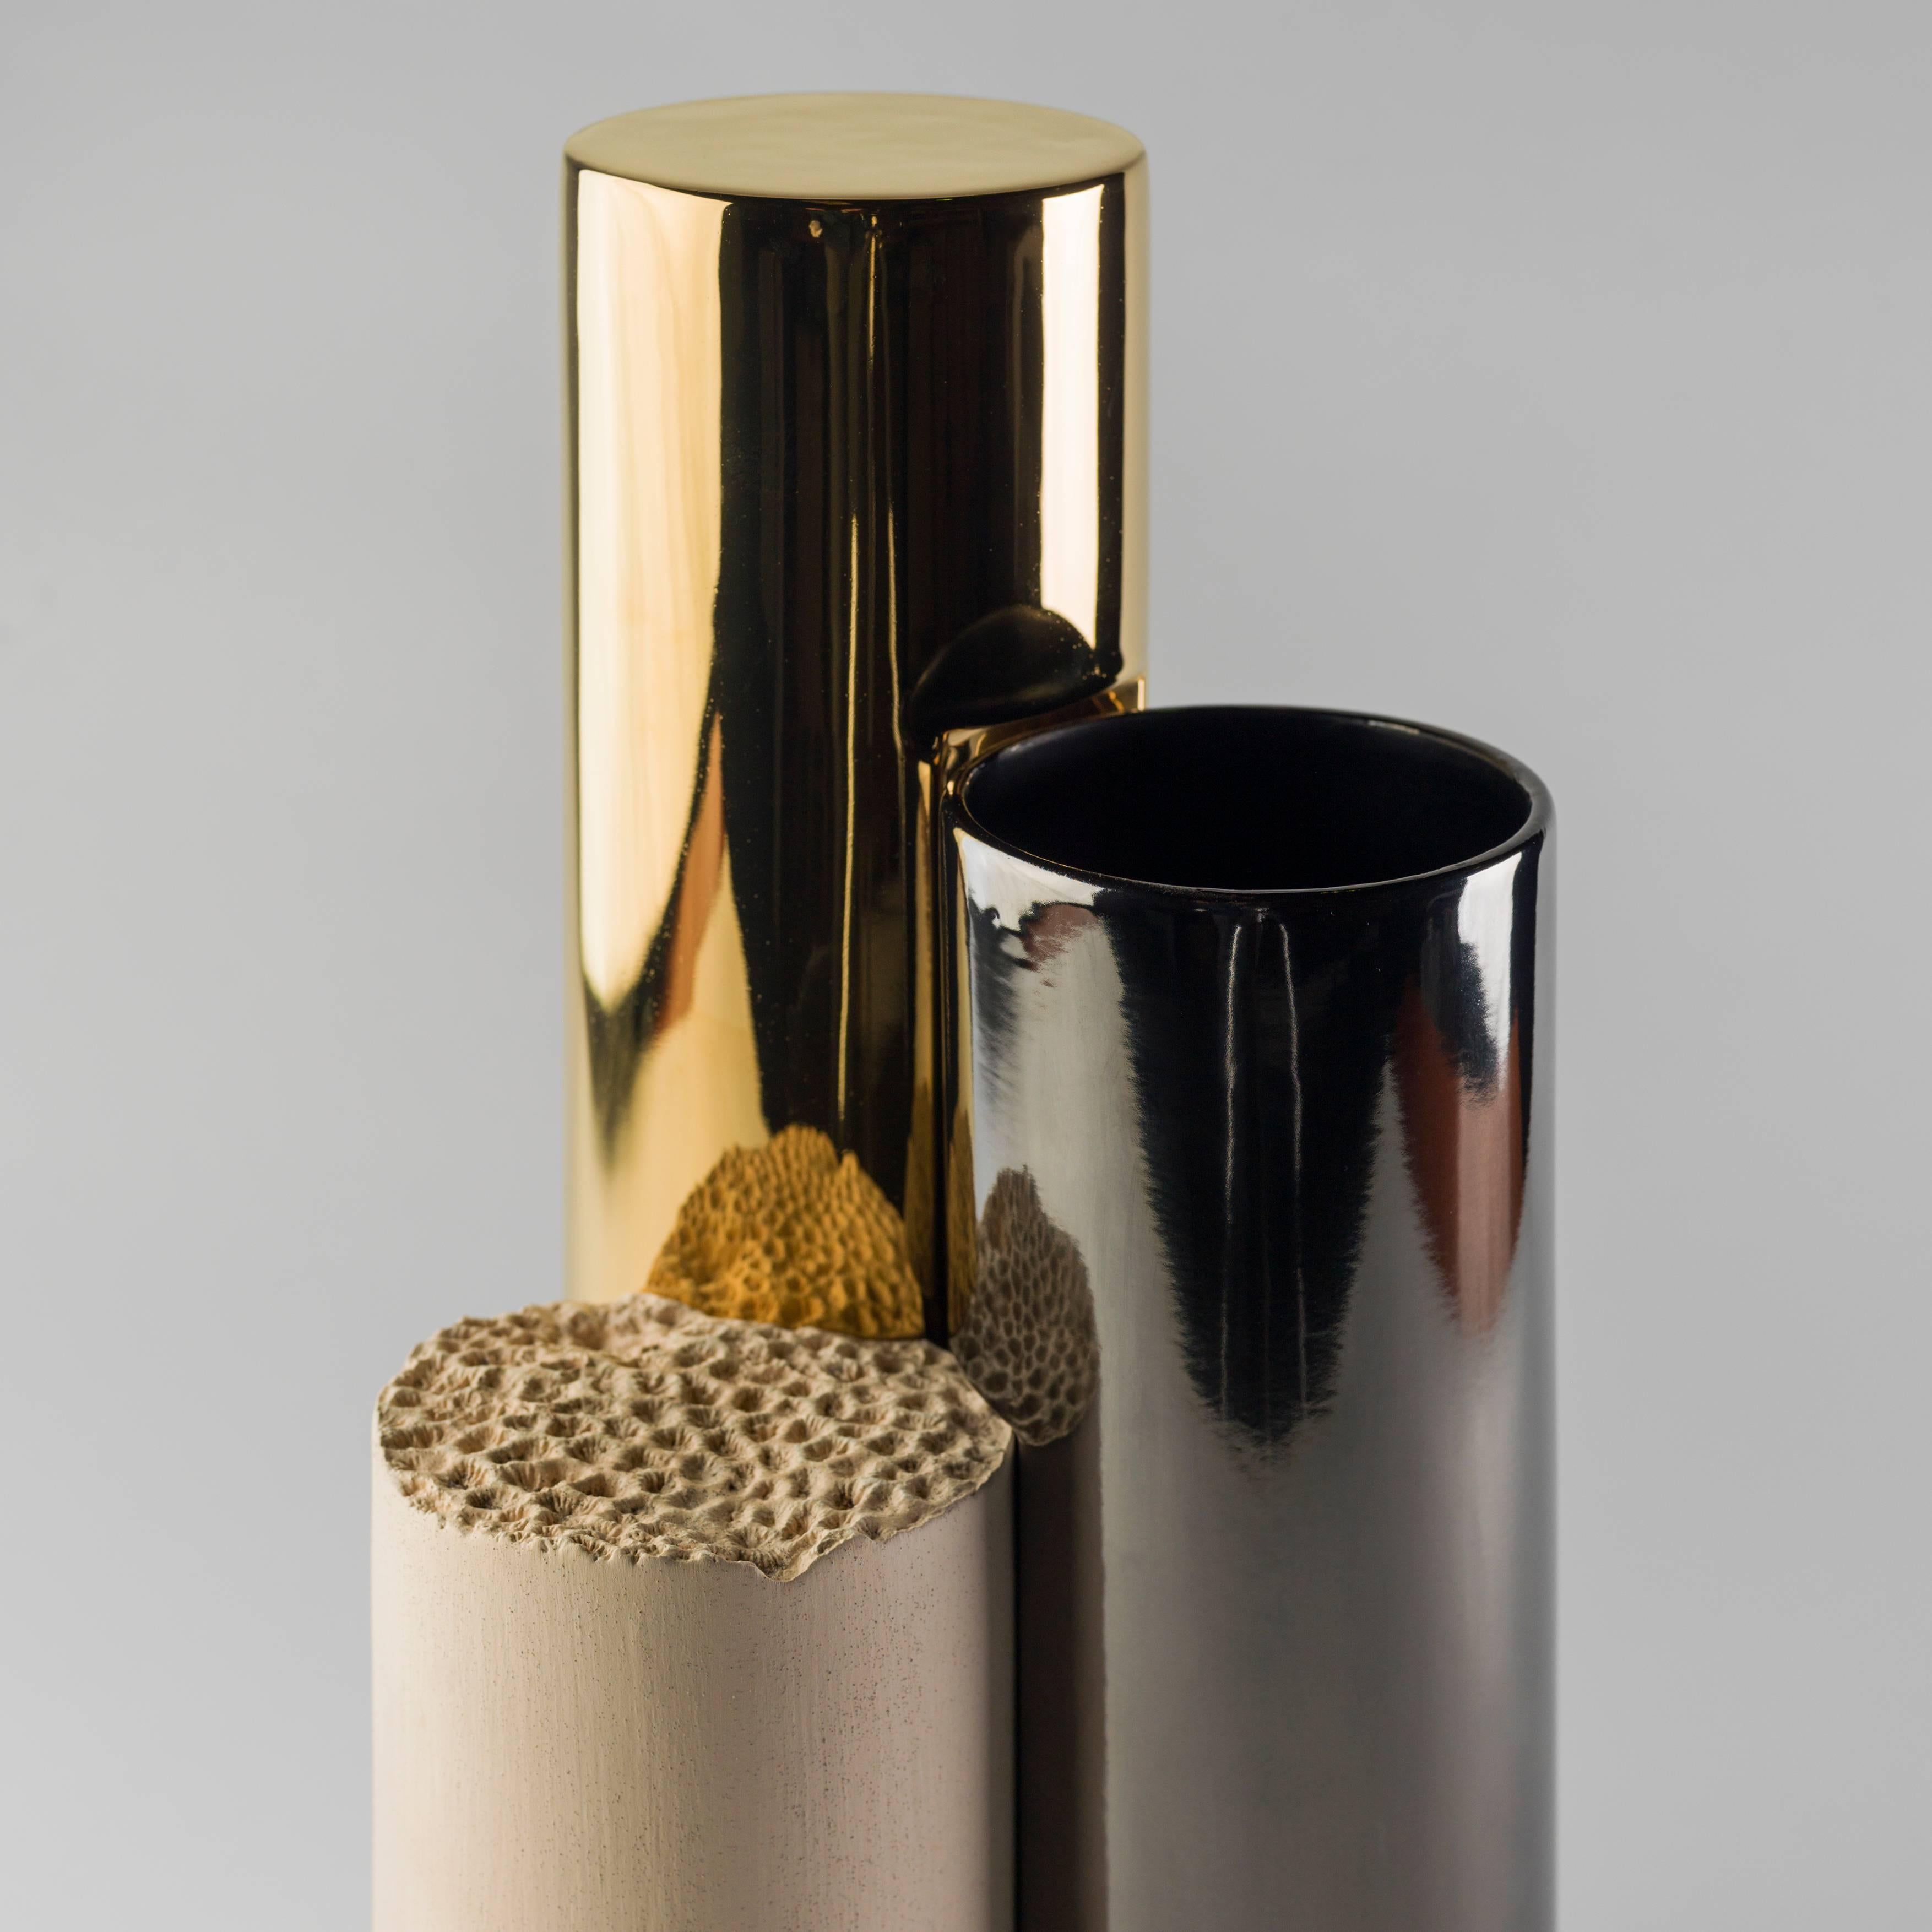 Is-Dher vases design by Sheikha Hind Bint Majid Al Qassimi.

24-carat gold-plated enameled ceramic vase, platinum and a beige engobe. 

Limited edition of eight units and two artist proofs and two prototypes.

Measure: 19 x 18 x 40 H